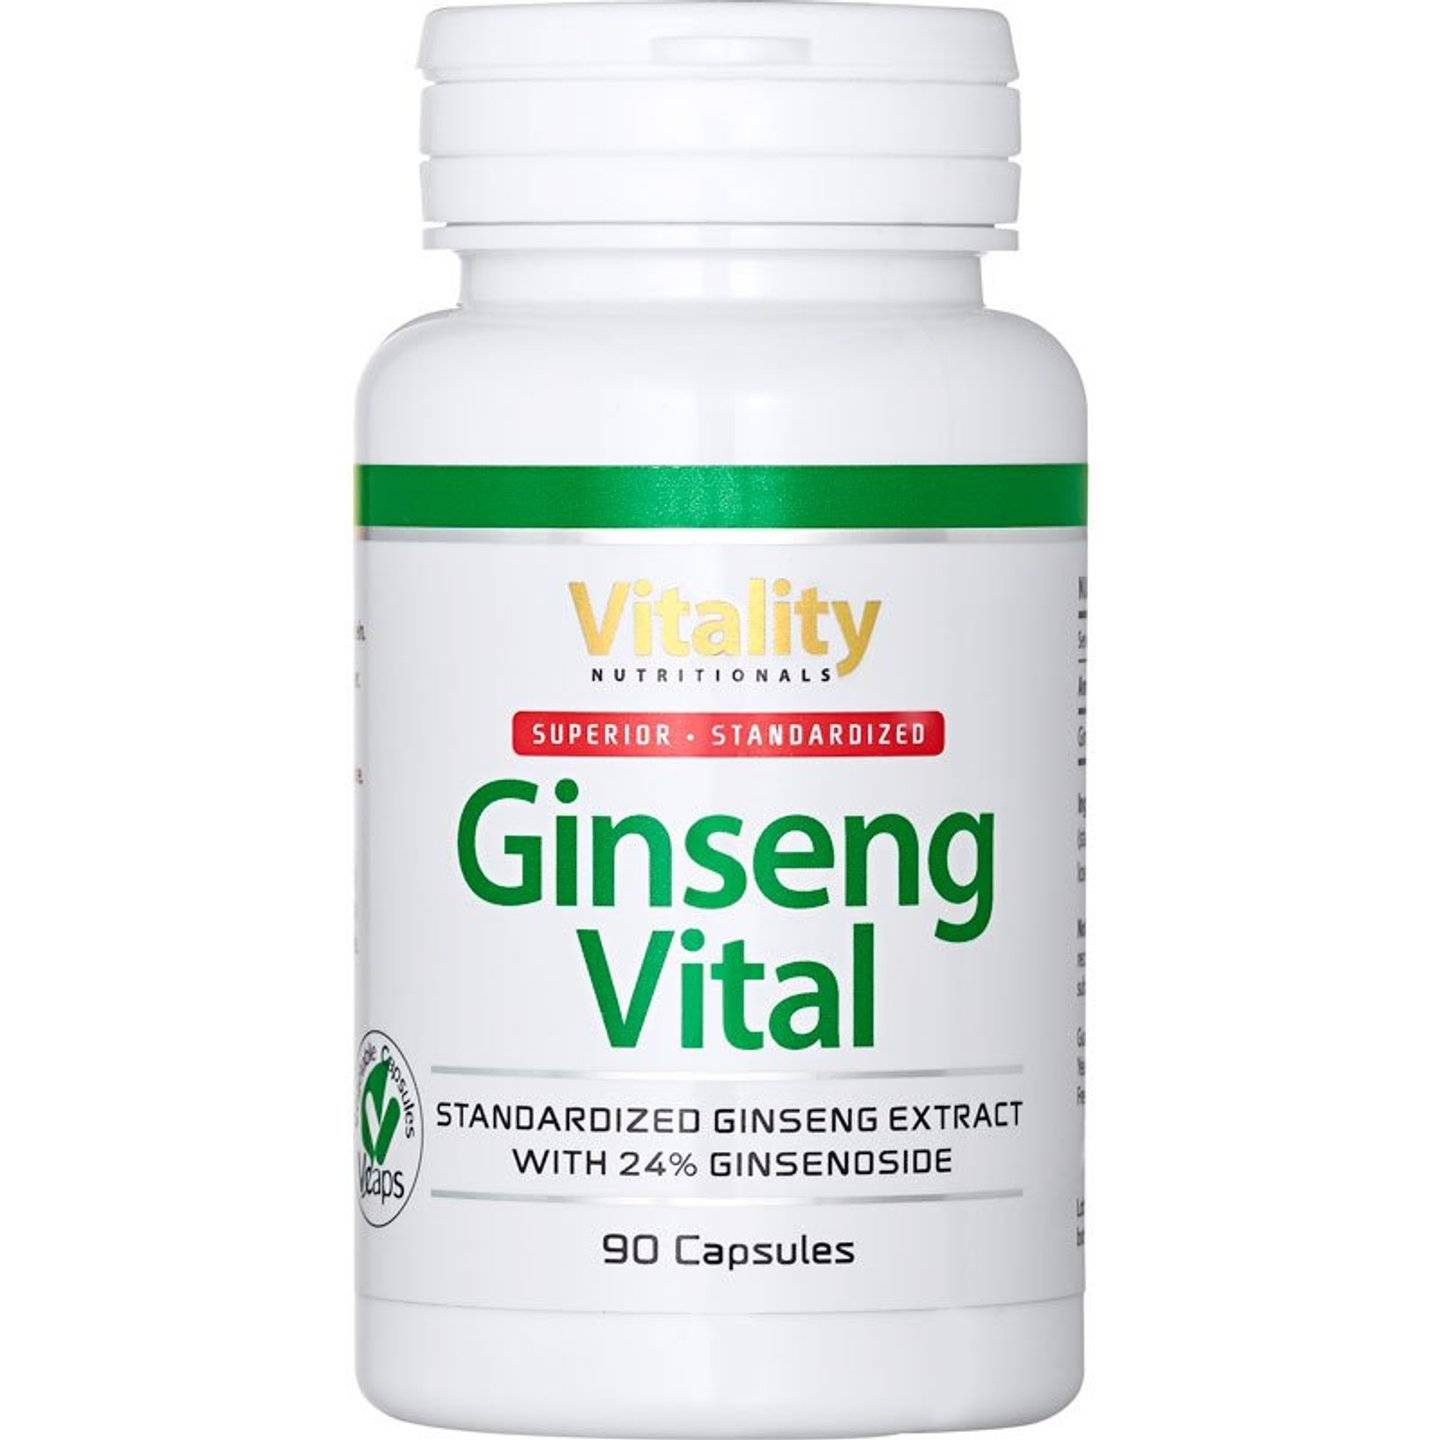 Ginseng supplements for vitality